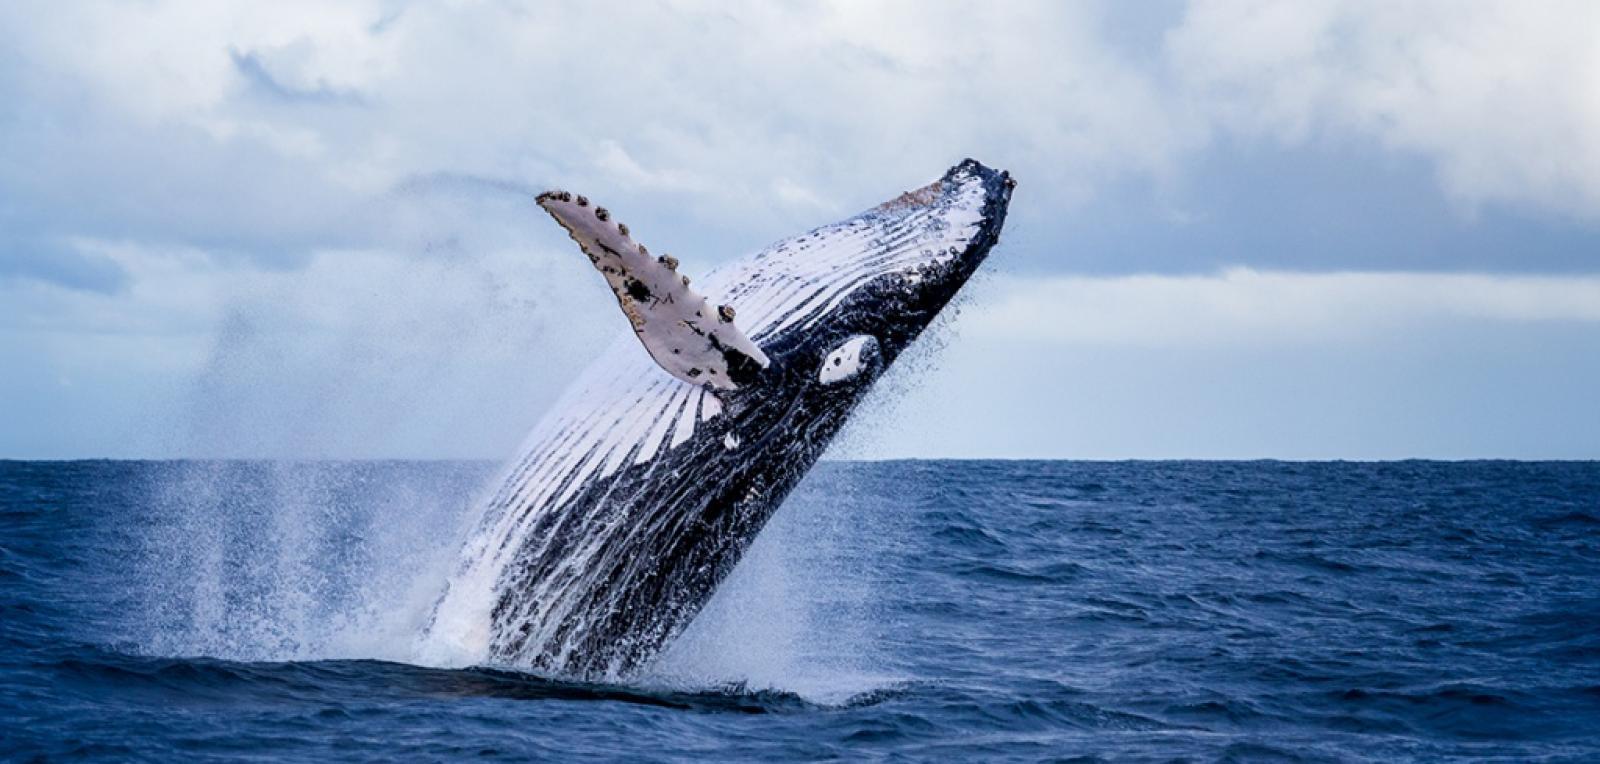 Protecting whales is important for everyone's health